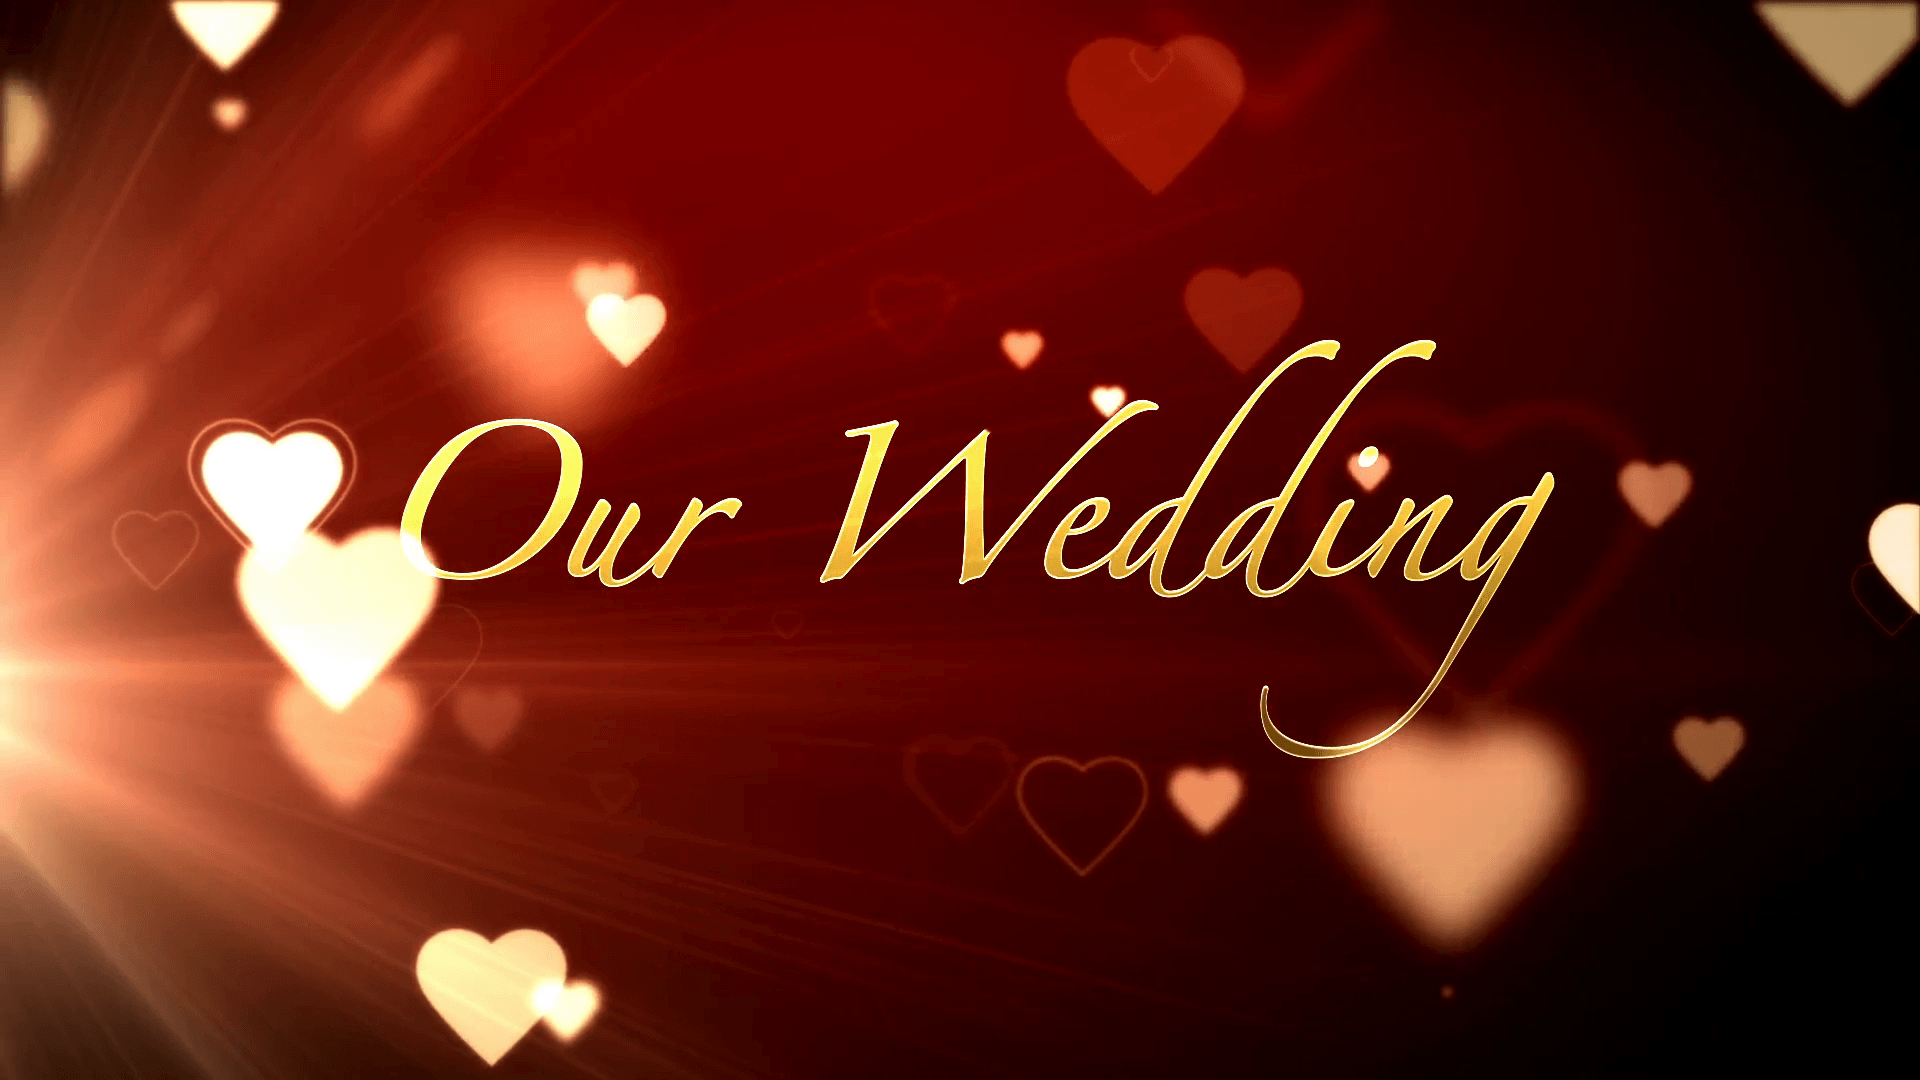 HD Red Heart Wedding Motion Background